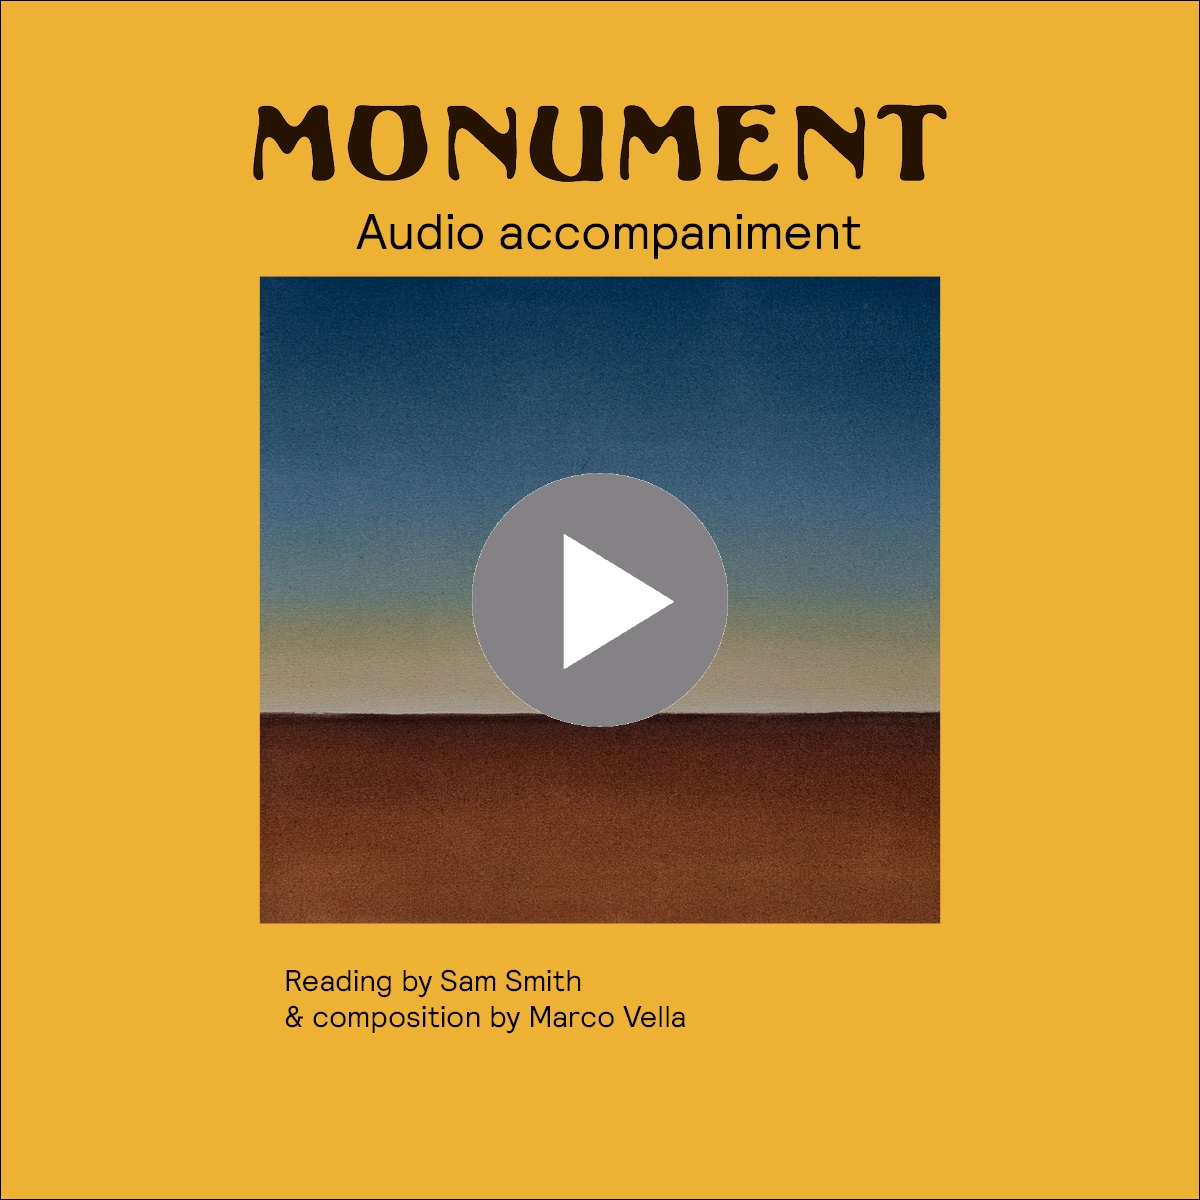 monument audio accompaniment - reading by sam smith and composition by marco vale